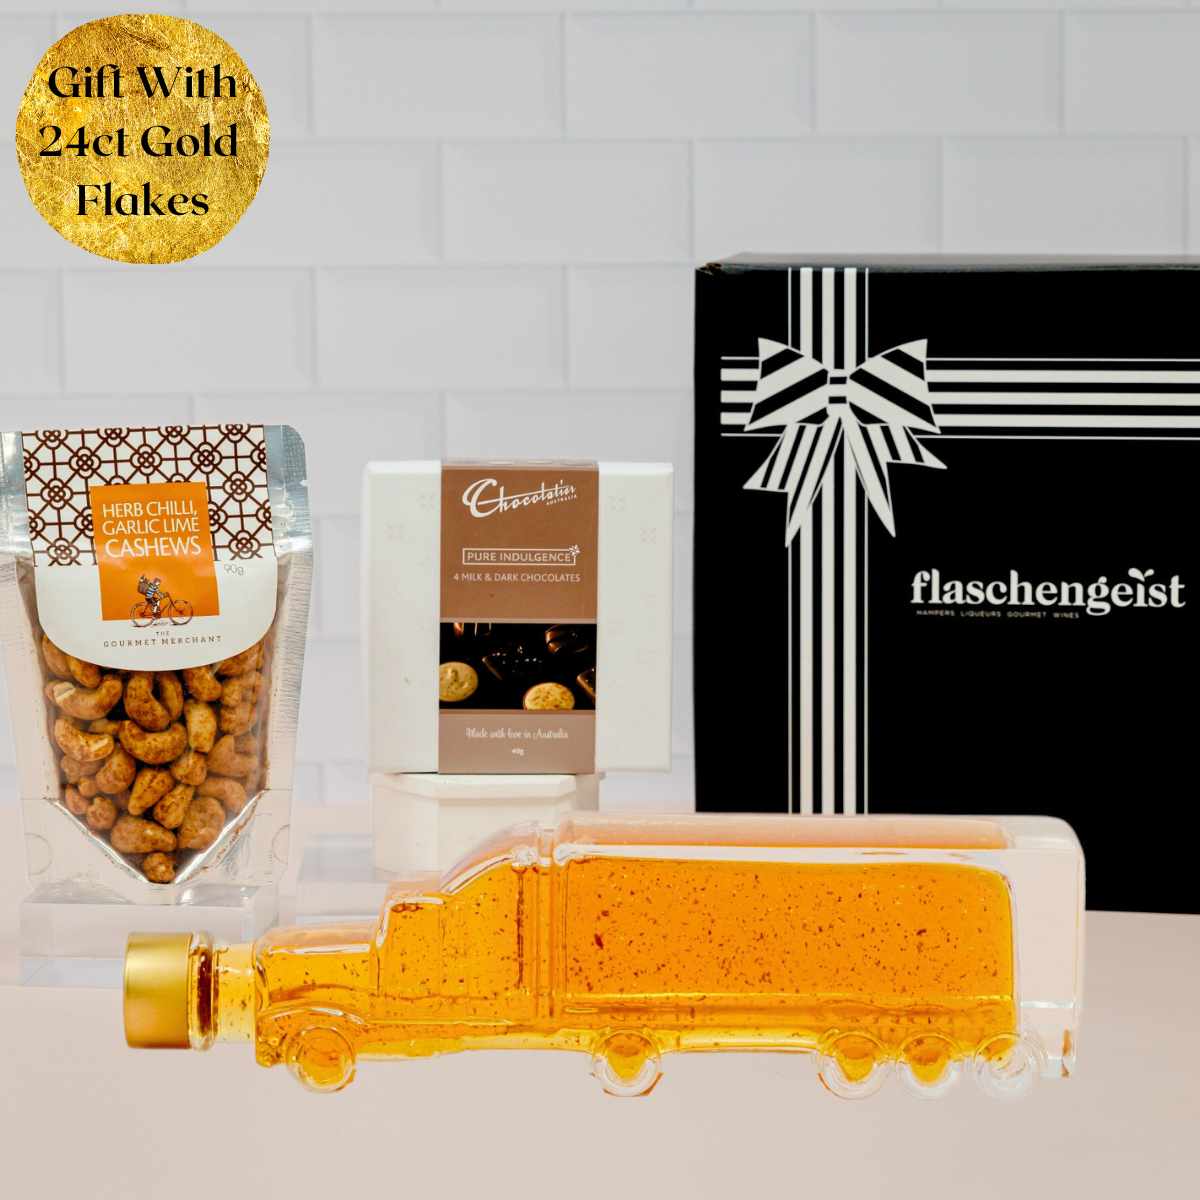 Truck Chocolate and Gourmet Cashew Hamper with 24ct Gold Flakes